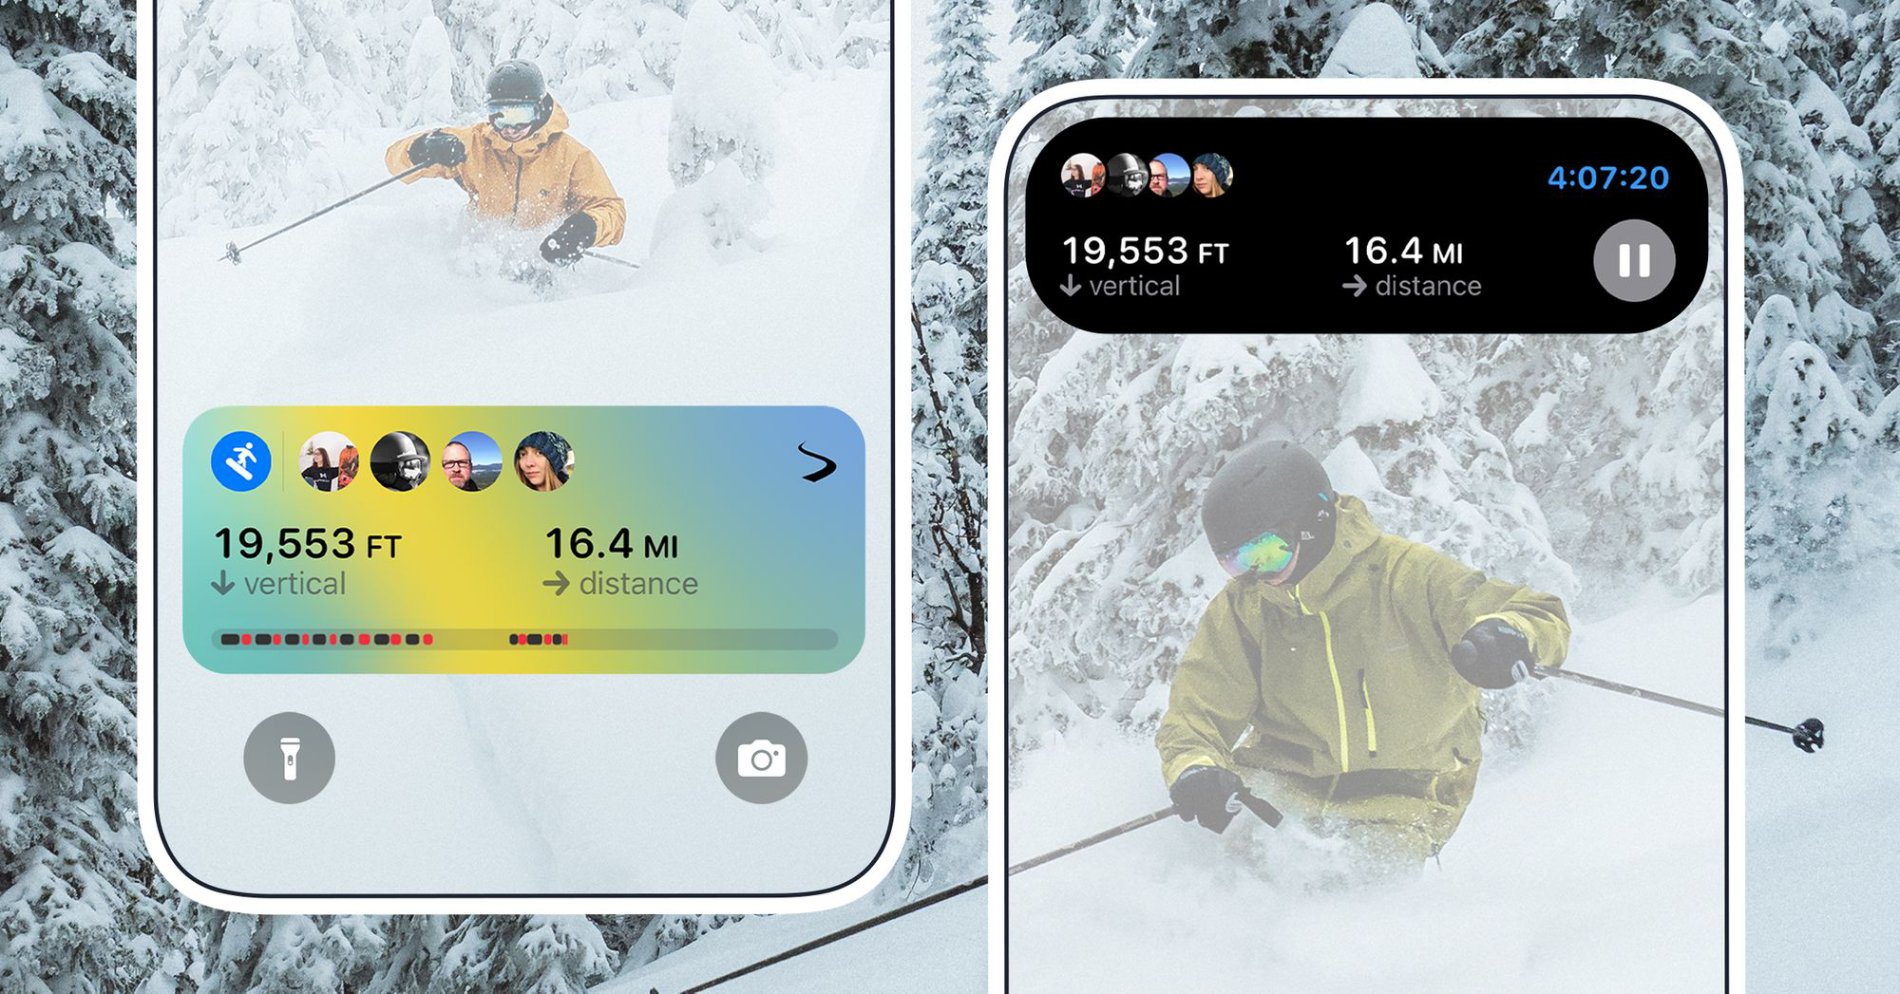 Slopes is the Perfect Companion App for Skiers or Snowboarders